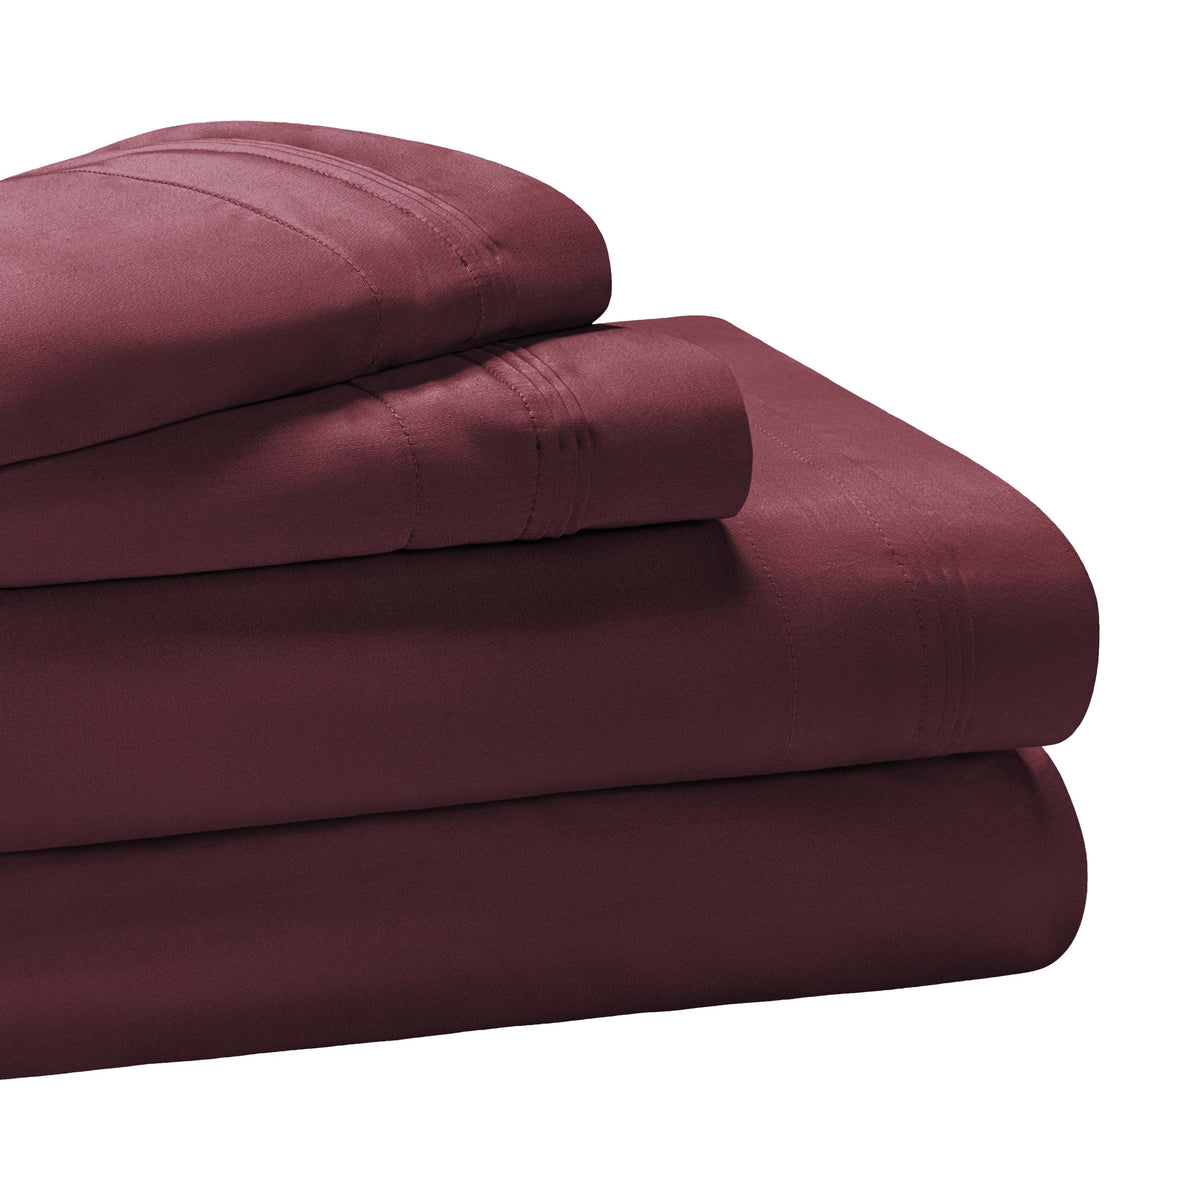  Egyptian Cotton 650 Thread Count Eco-Friendly Solid Sheet Set - Plum